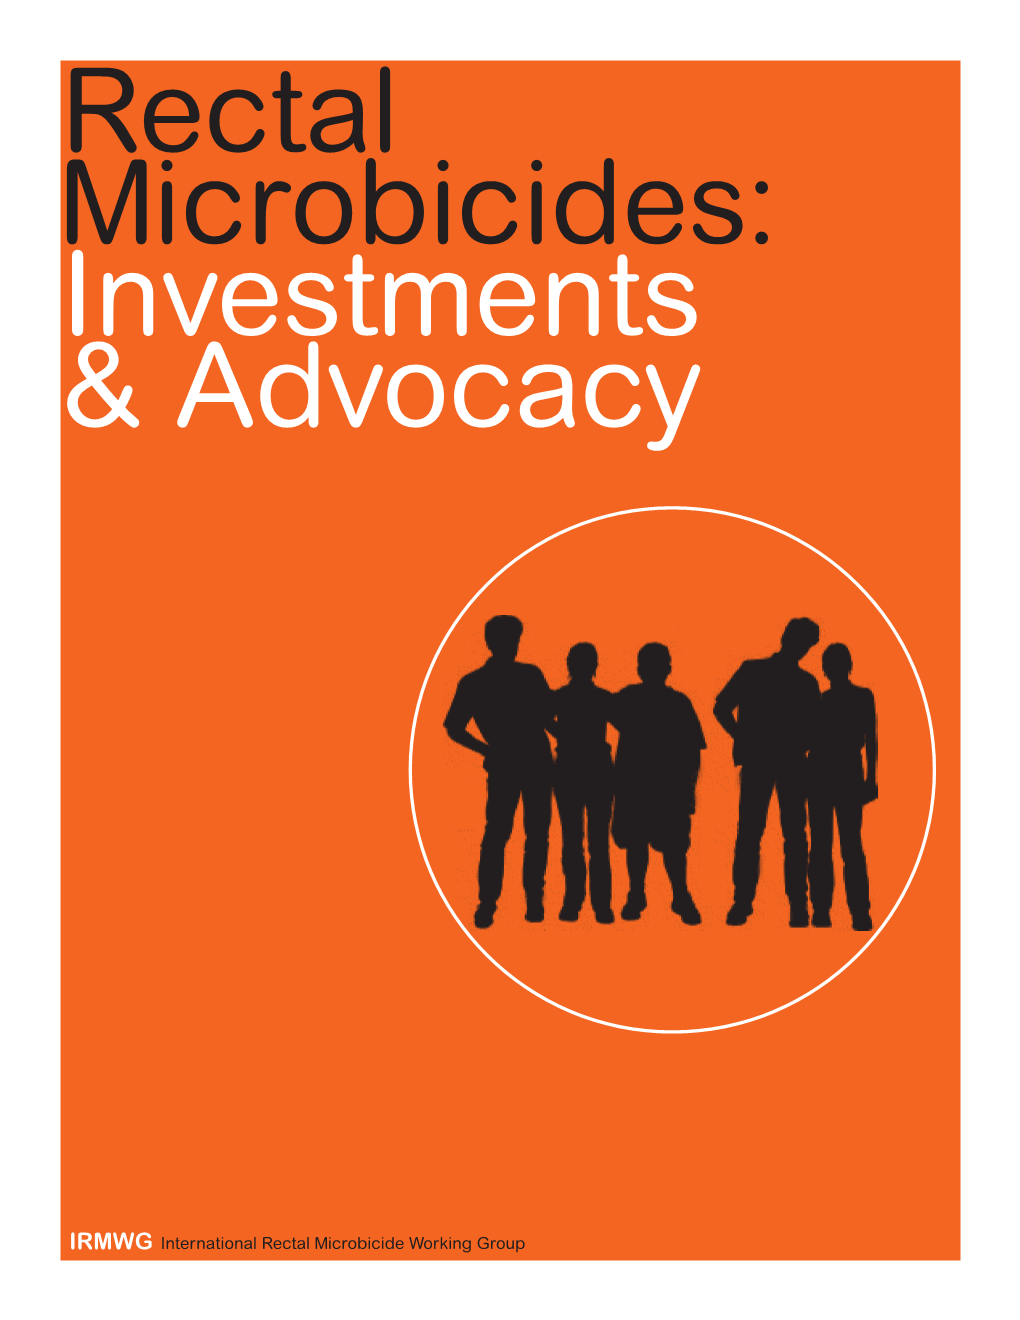 International Rectal Microbicide Working Group Rectal Microbicides: Investments & Advocacy